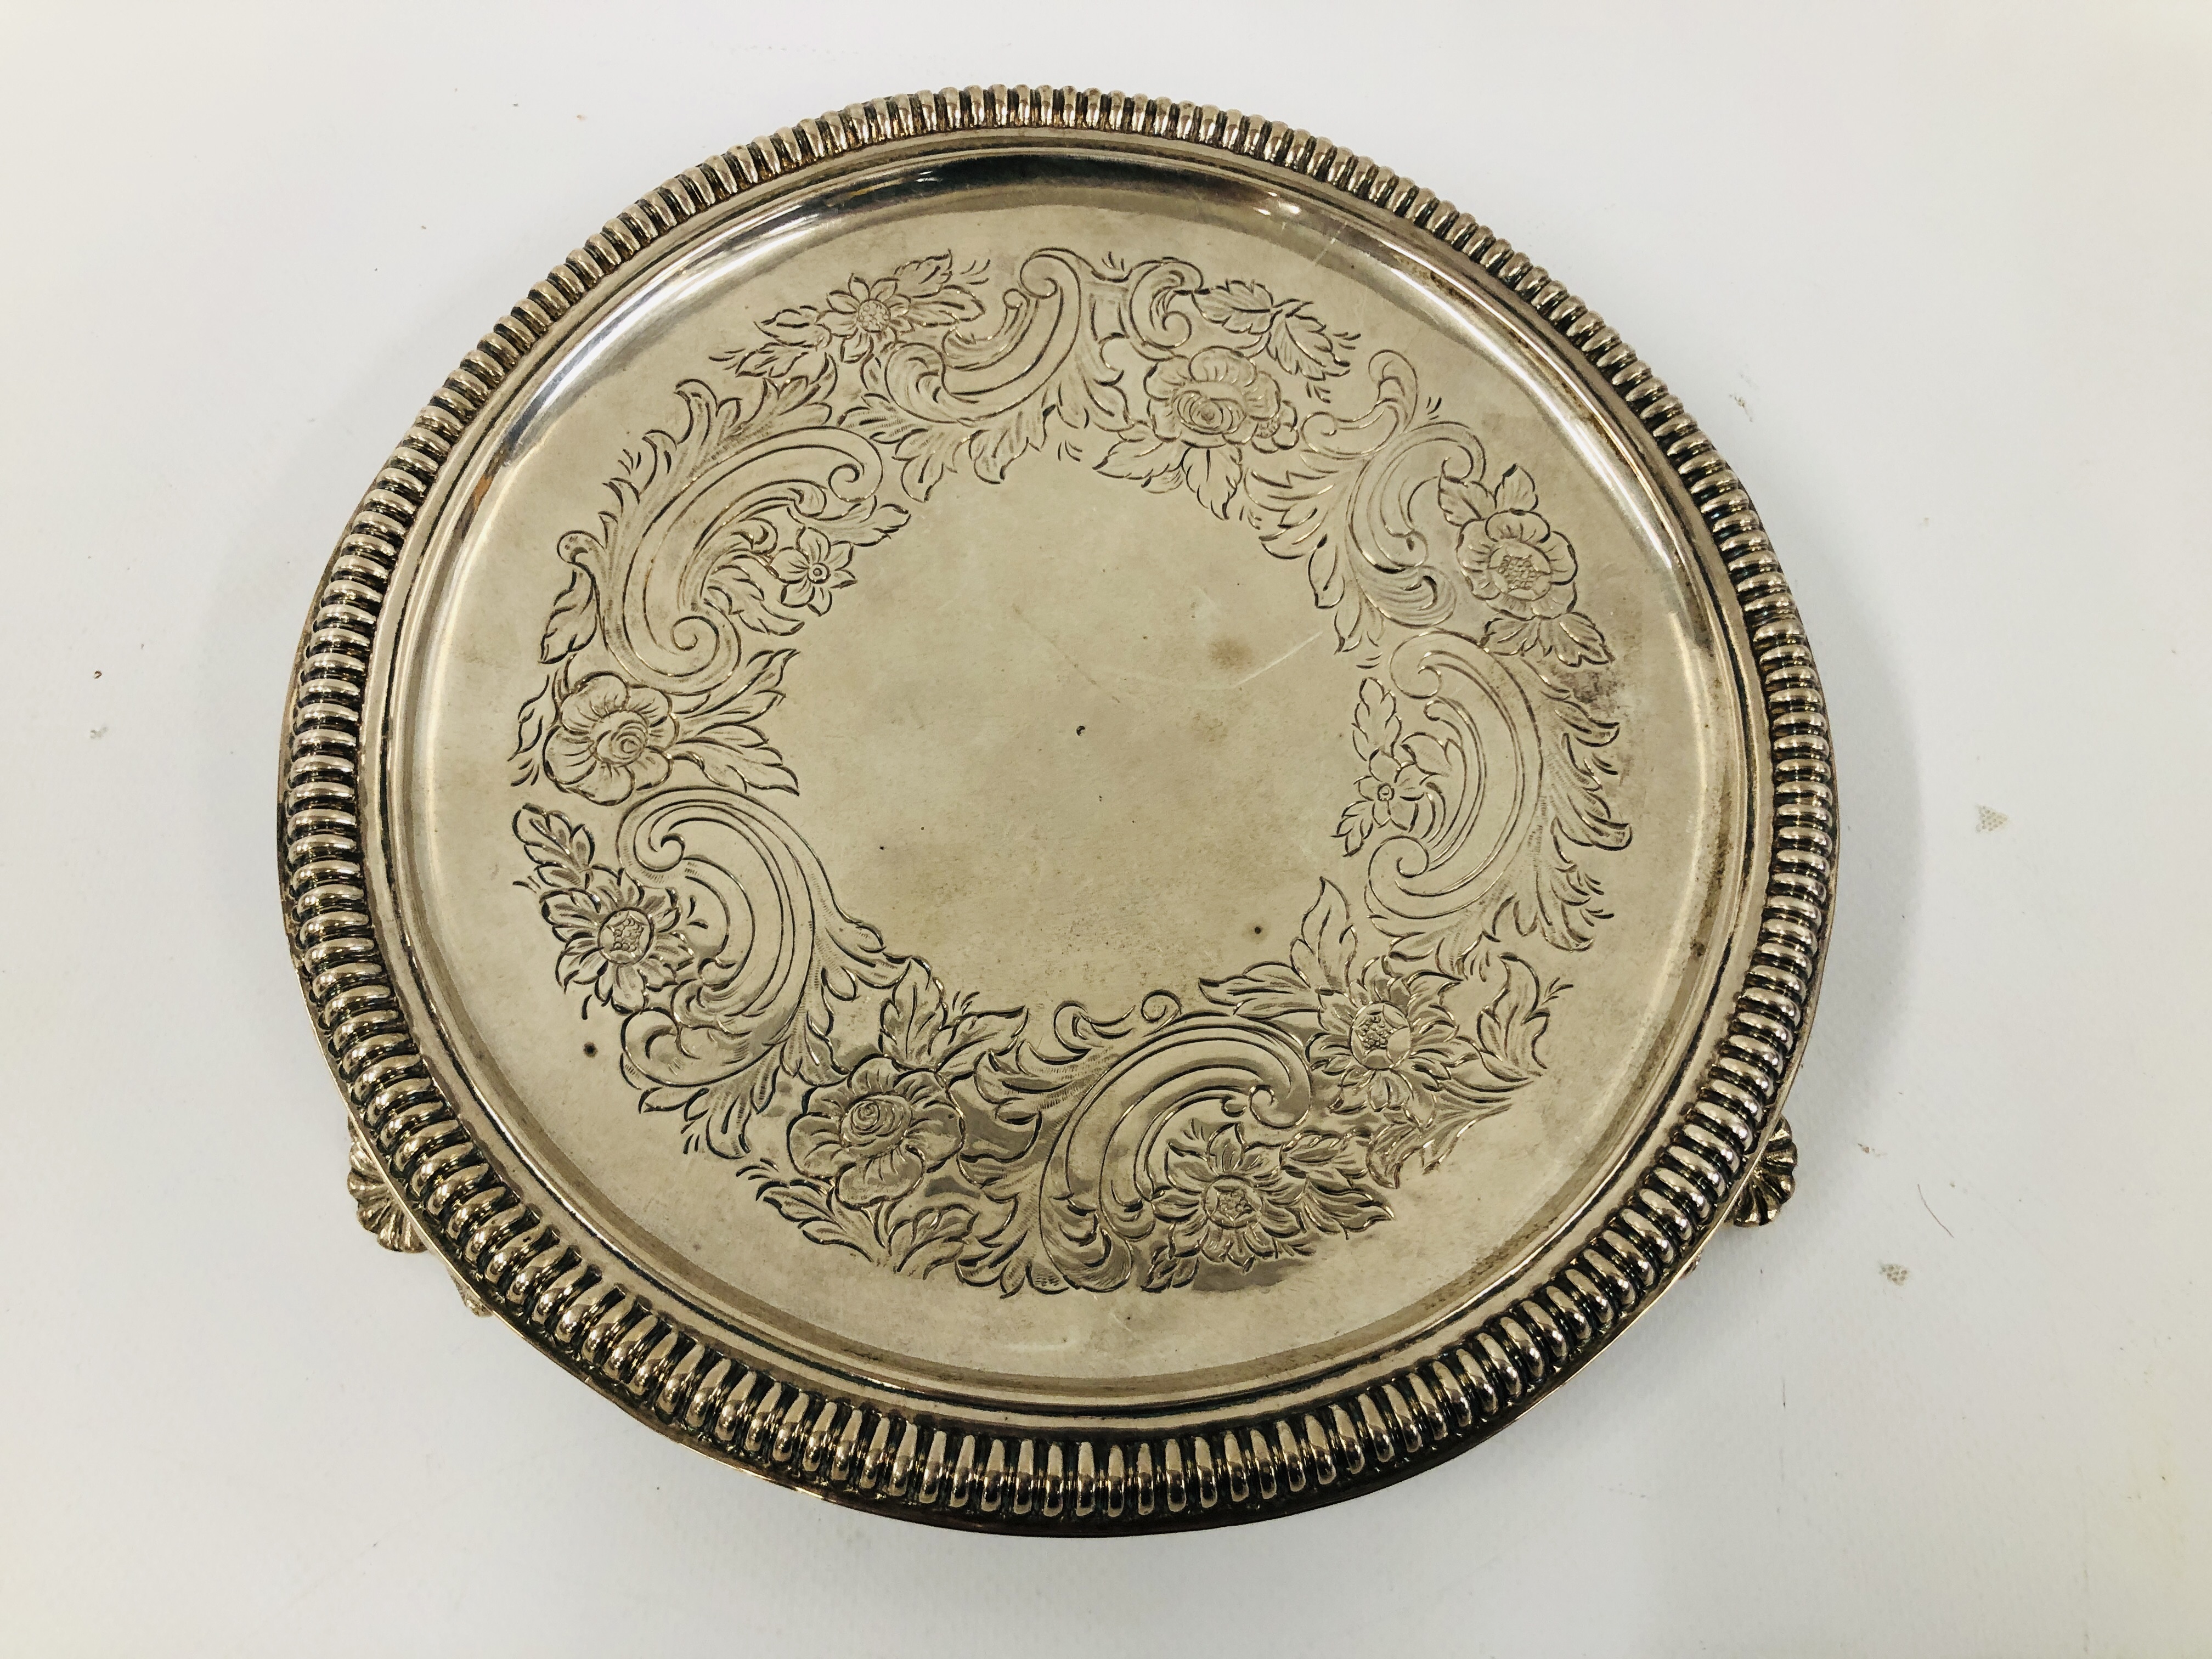 A SILVER CIRCULAR SALVER WITH NULLED RIM ON SCROLLED TRIPOD FEET BY JOESEPH WALKER OF DUBLIN C17 - Image 2 of 13